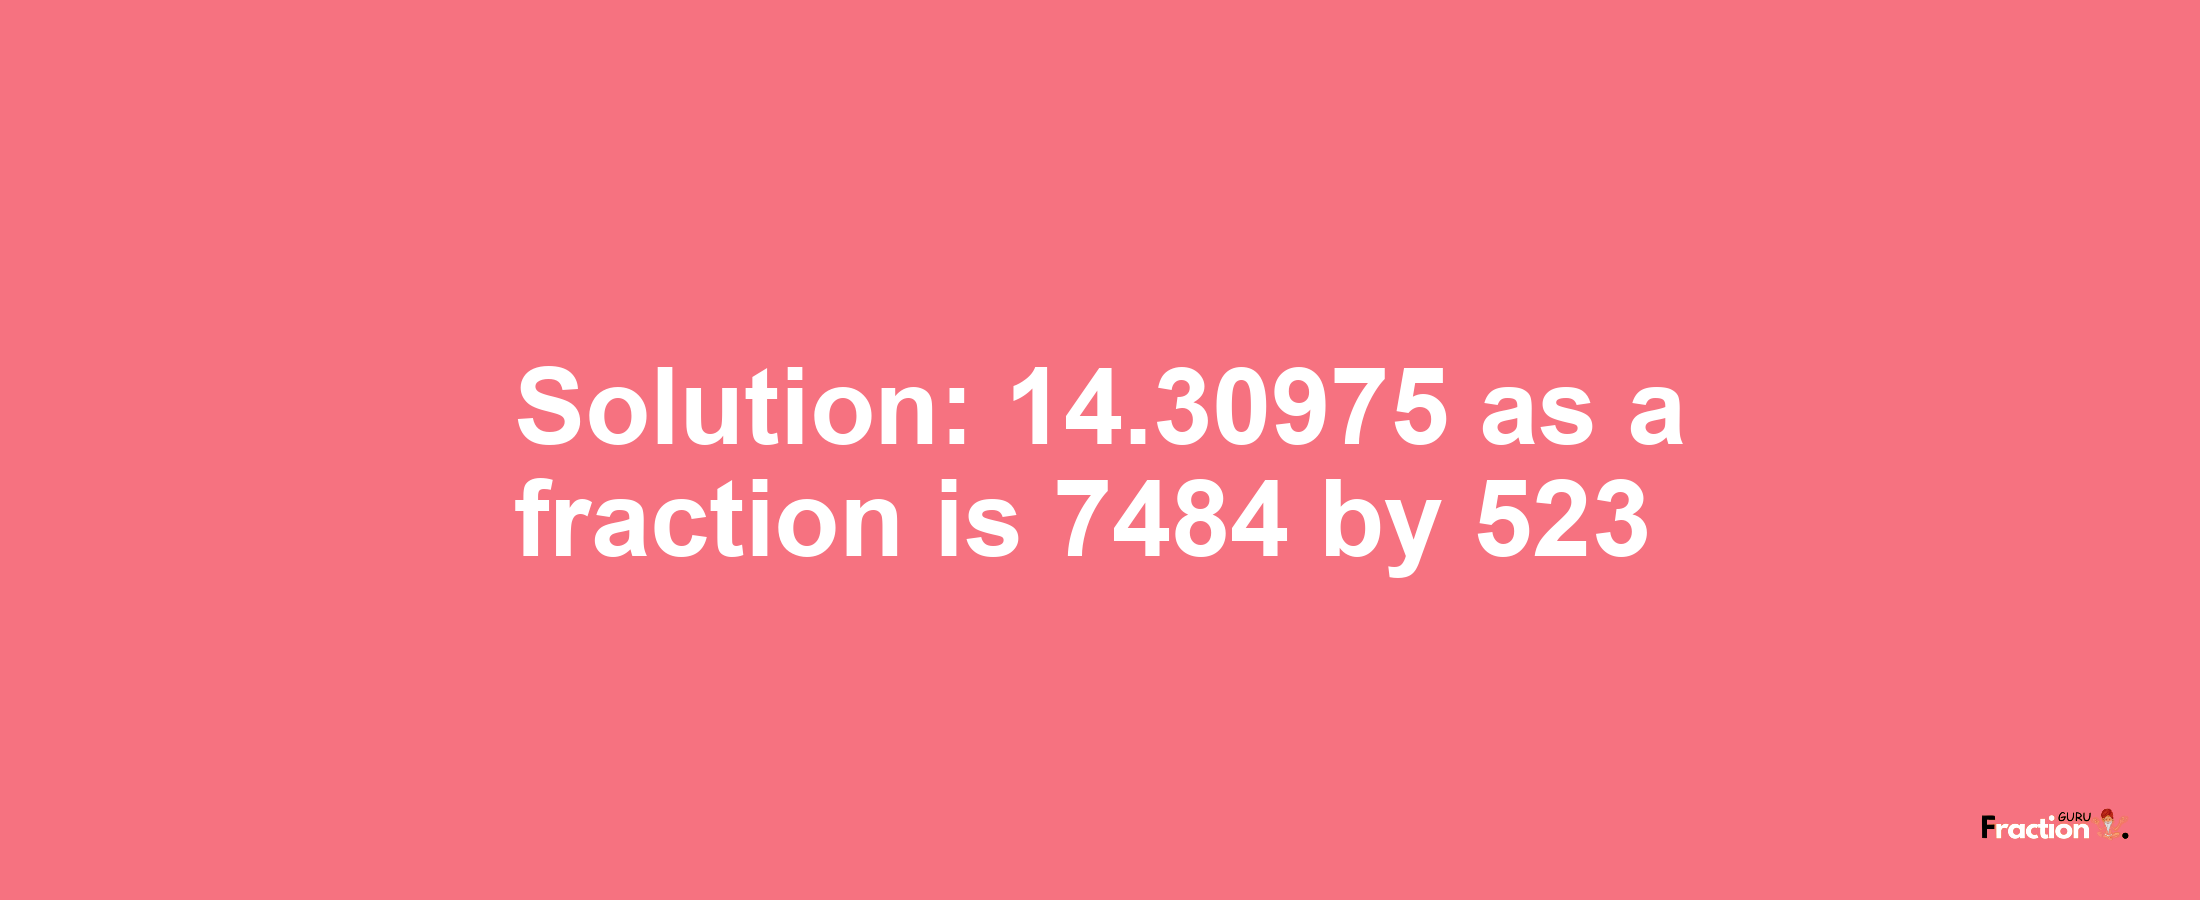 Solution:14.30975 as a fraction is 7484/523